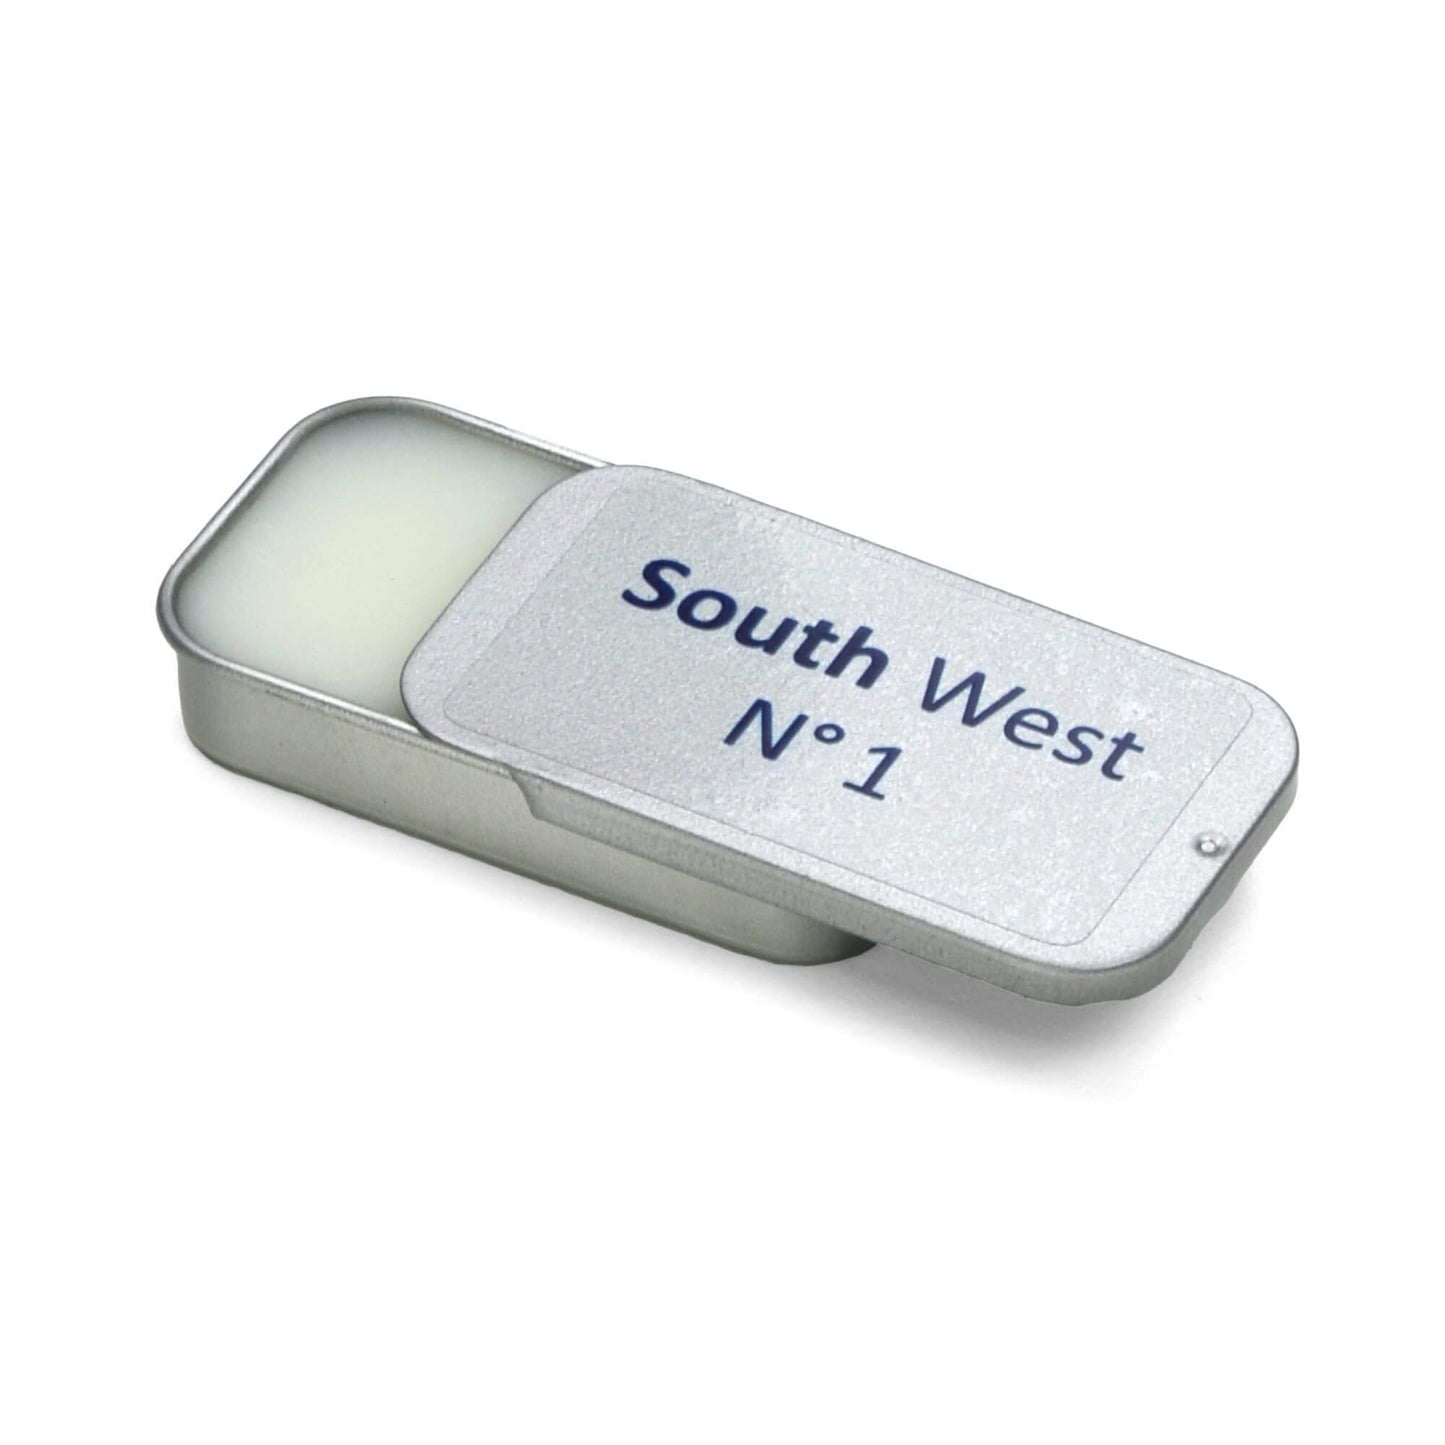 Solid Perfume 'South West No. 1'